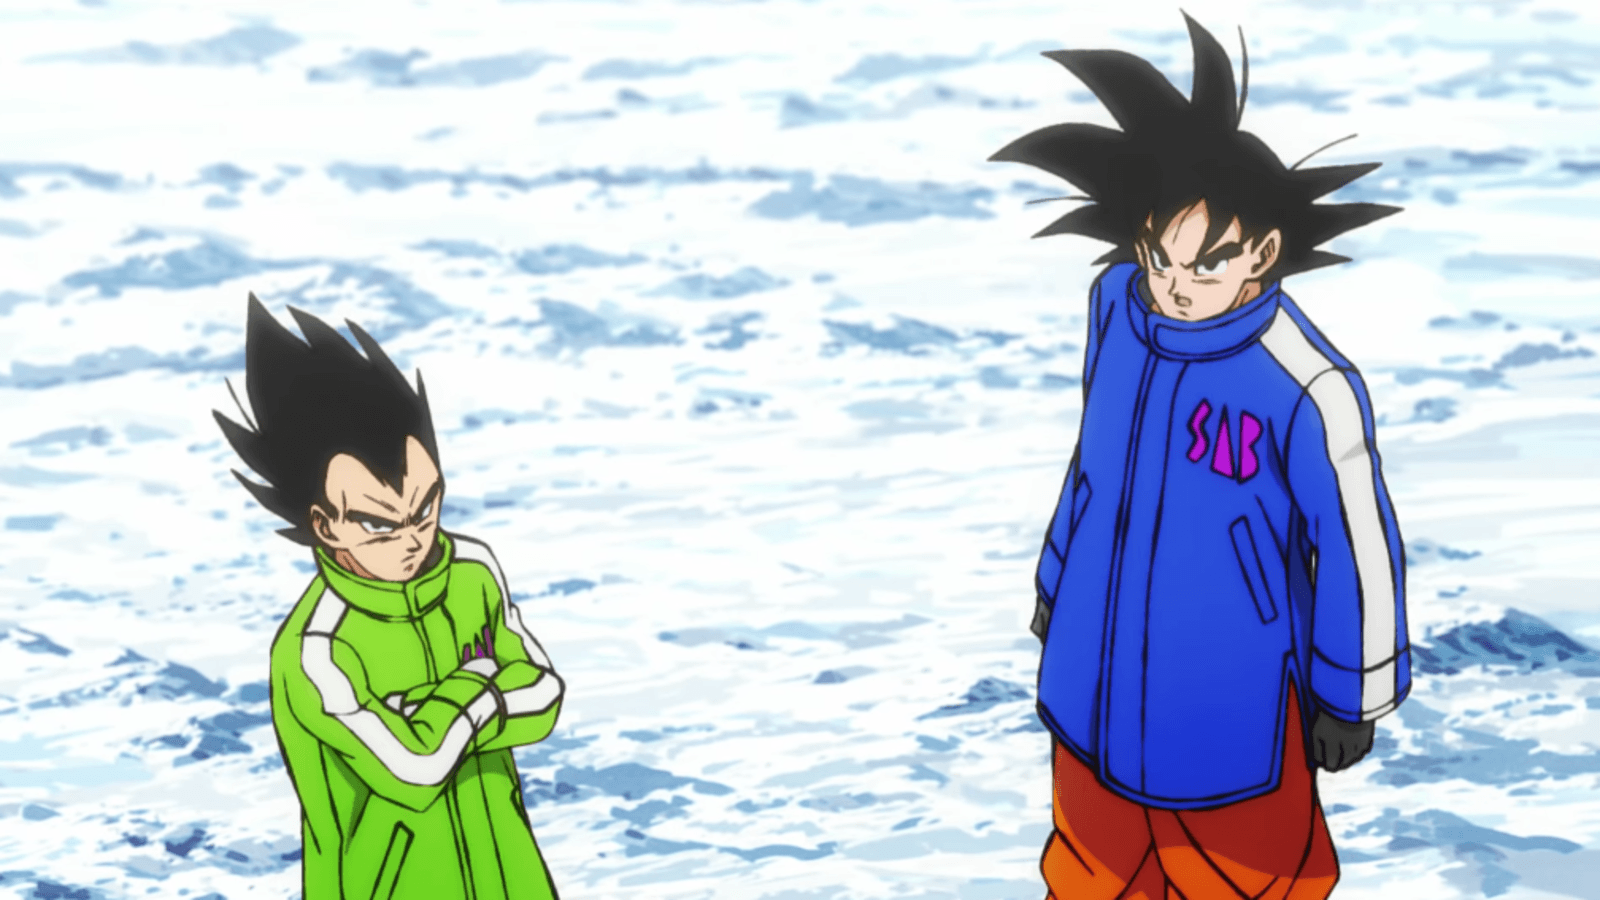 Dragon Ball Super: Broly trailer's and Vegeta's jackets are